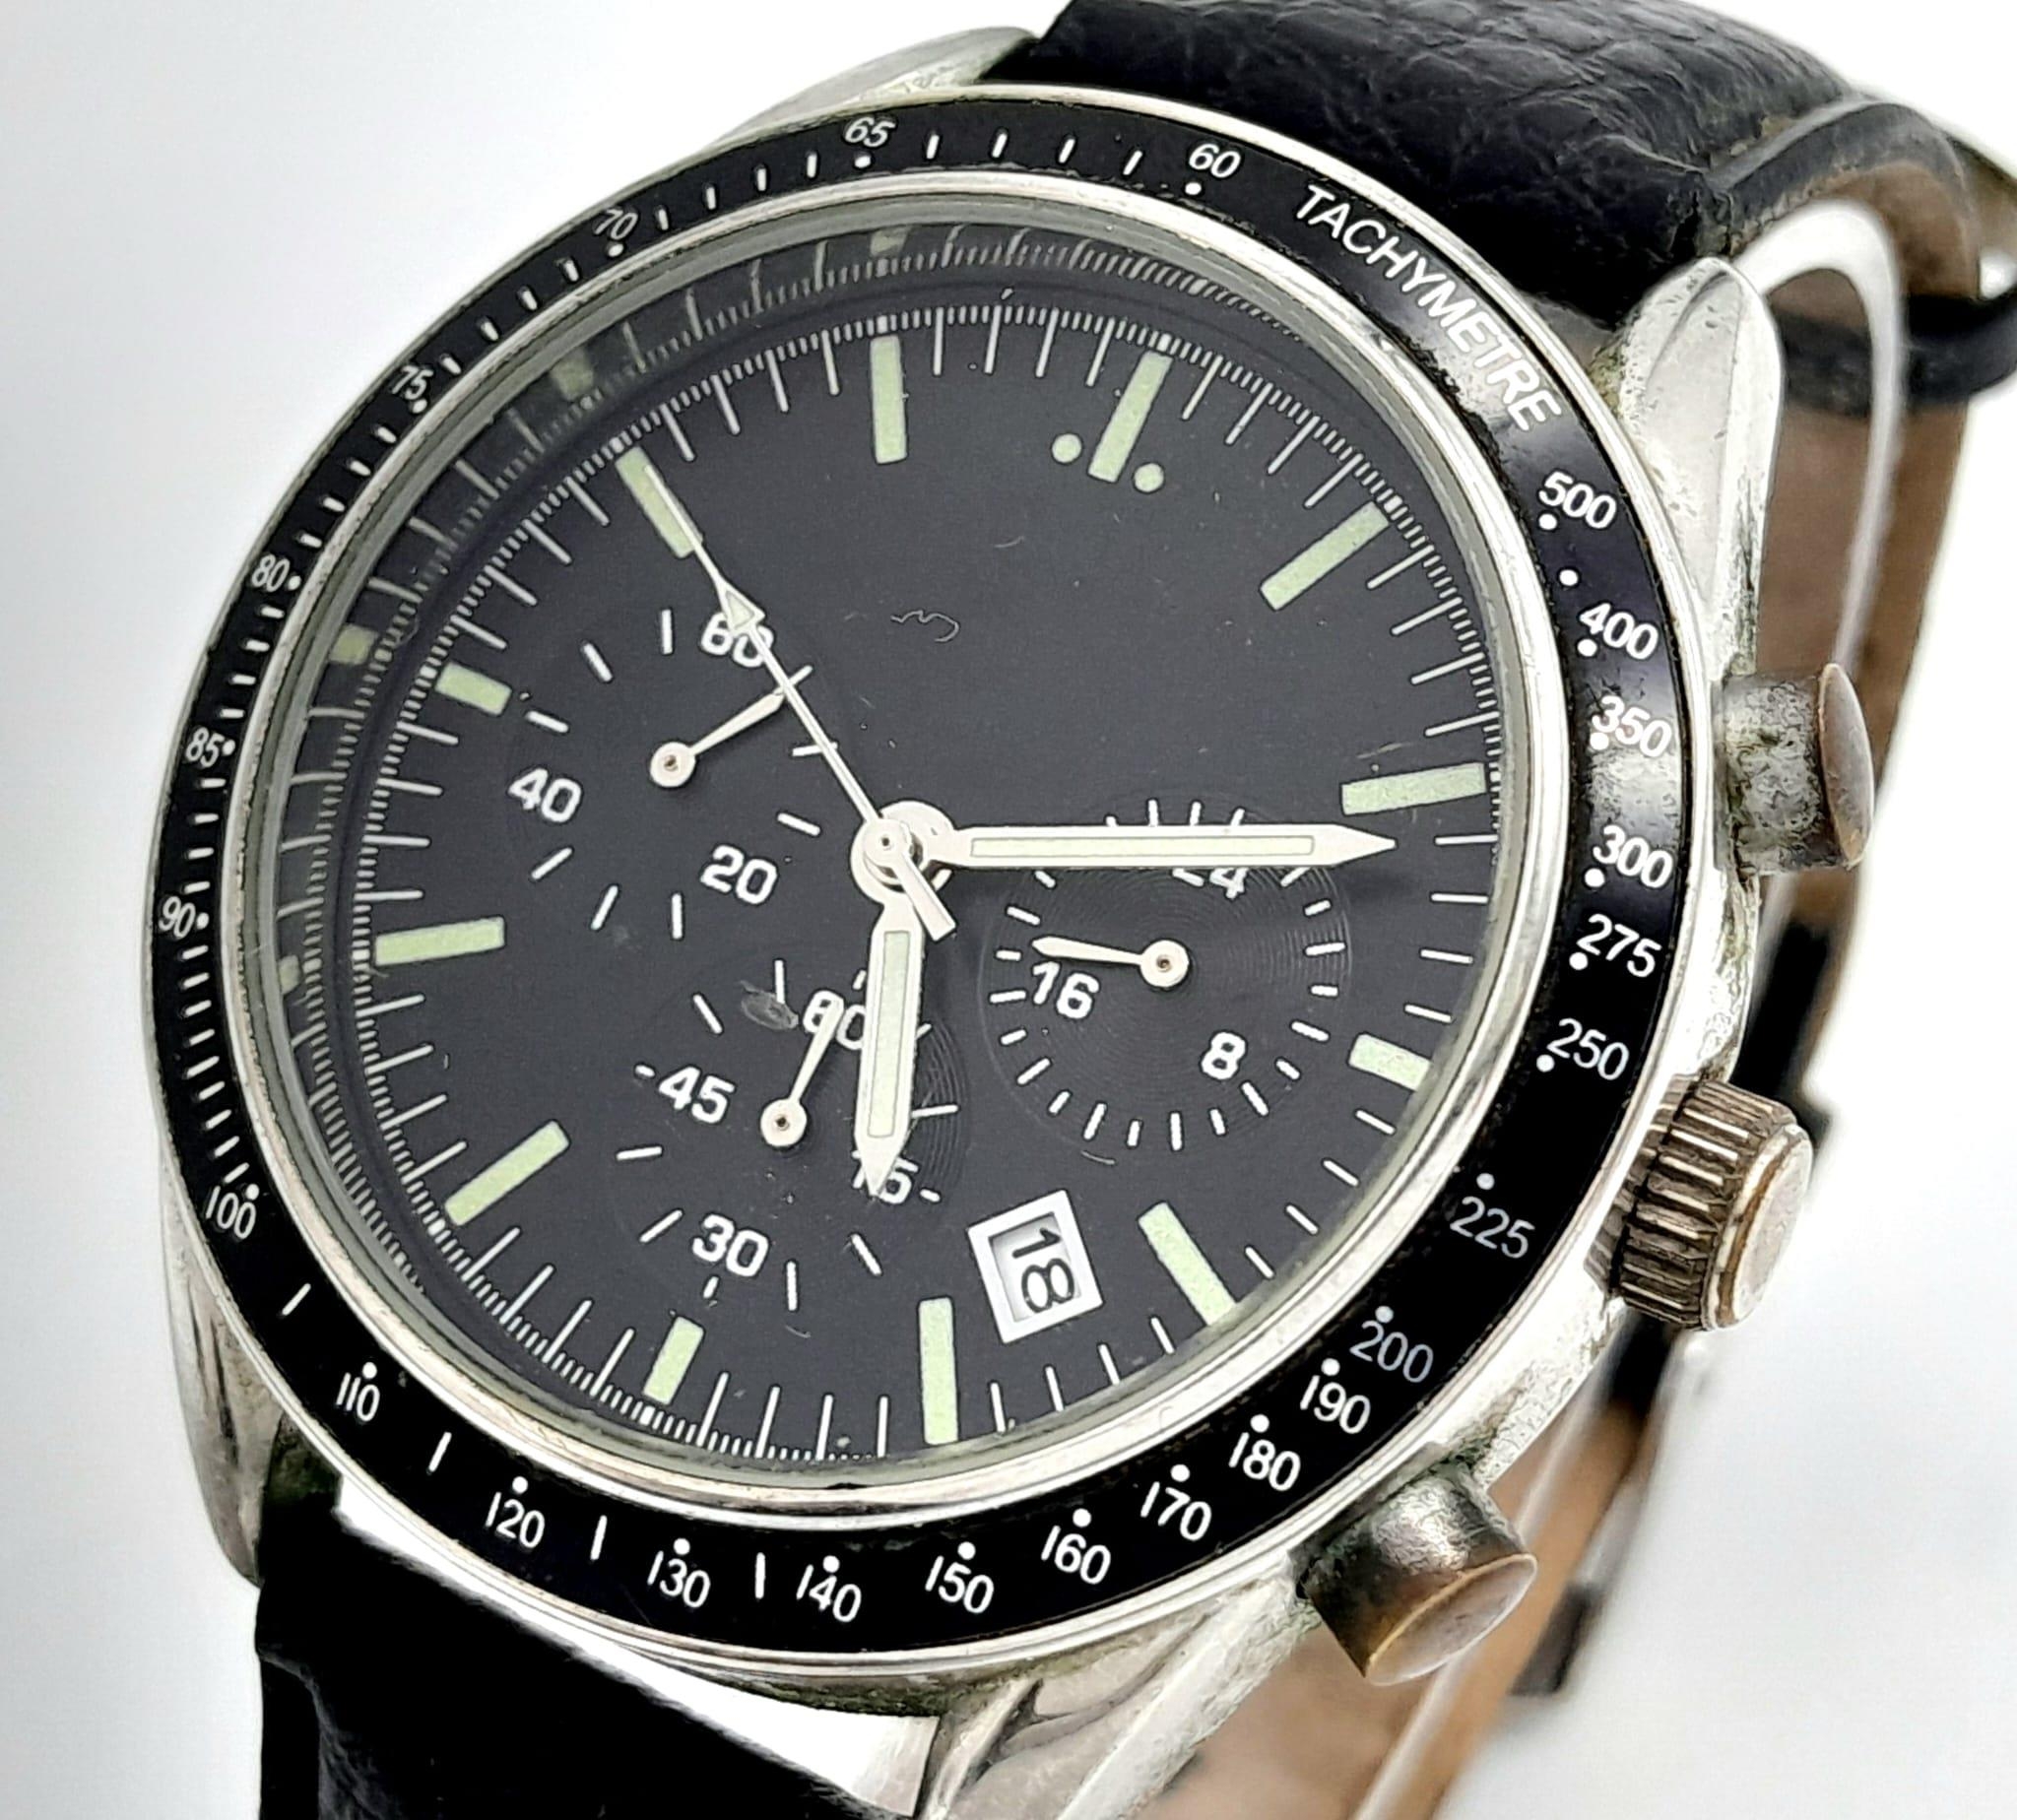 A United States Nasa Astronaut Tribute Watch. Black leather strap (worn), Stainless steel case - - Image 2 of 6